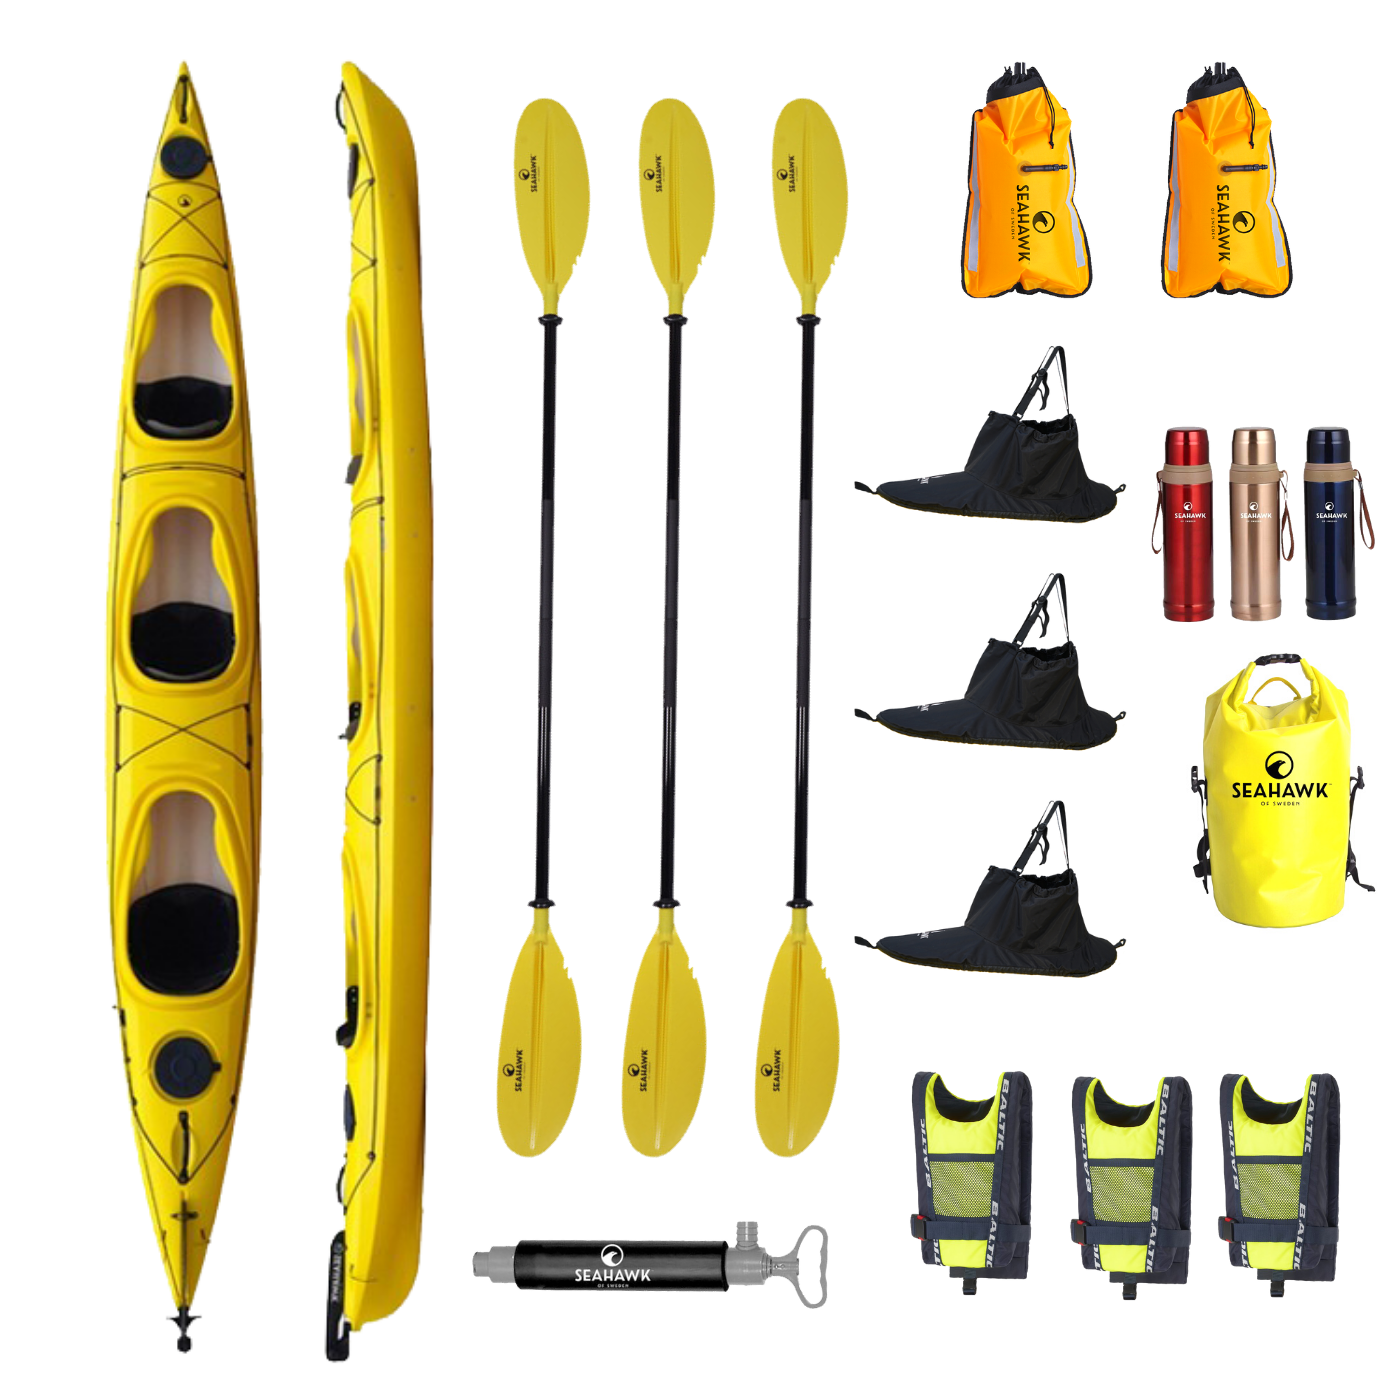 Seahawk Expedition K3